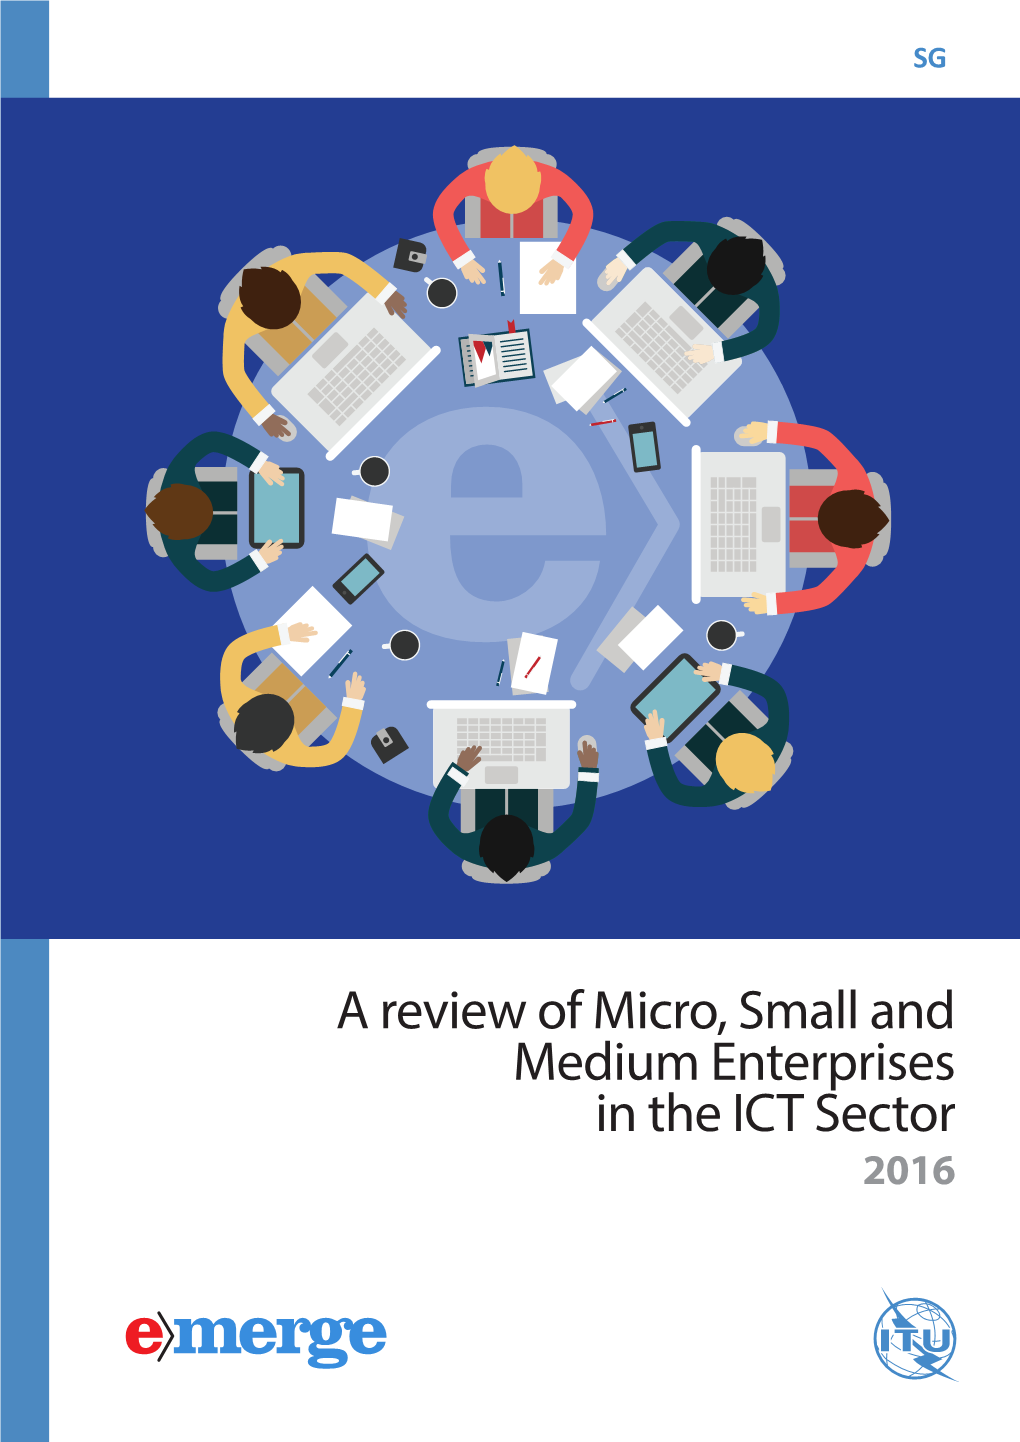 A Review of Micro, Small and Medium Enterprises in the ICT Sector